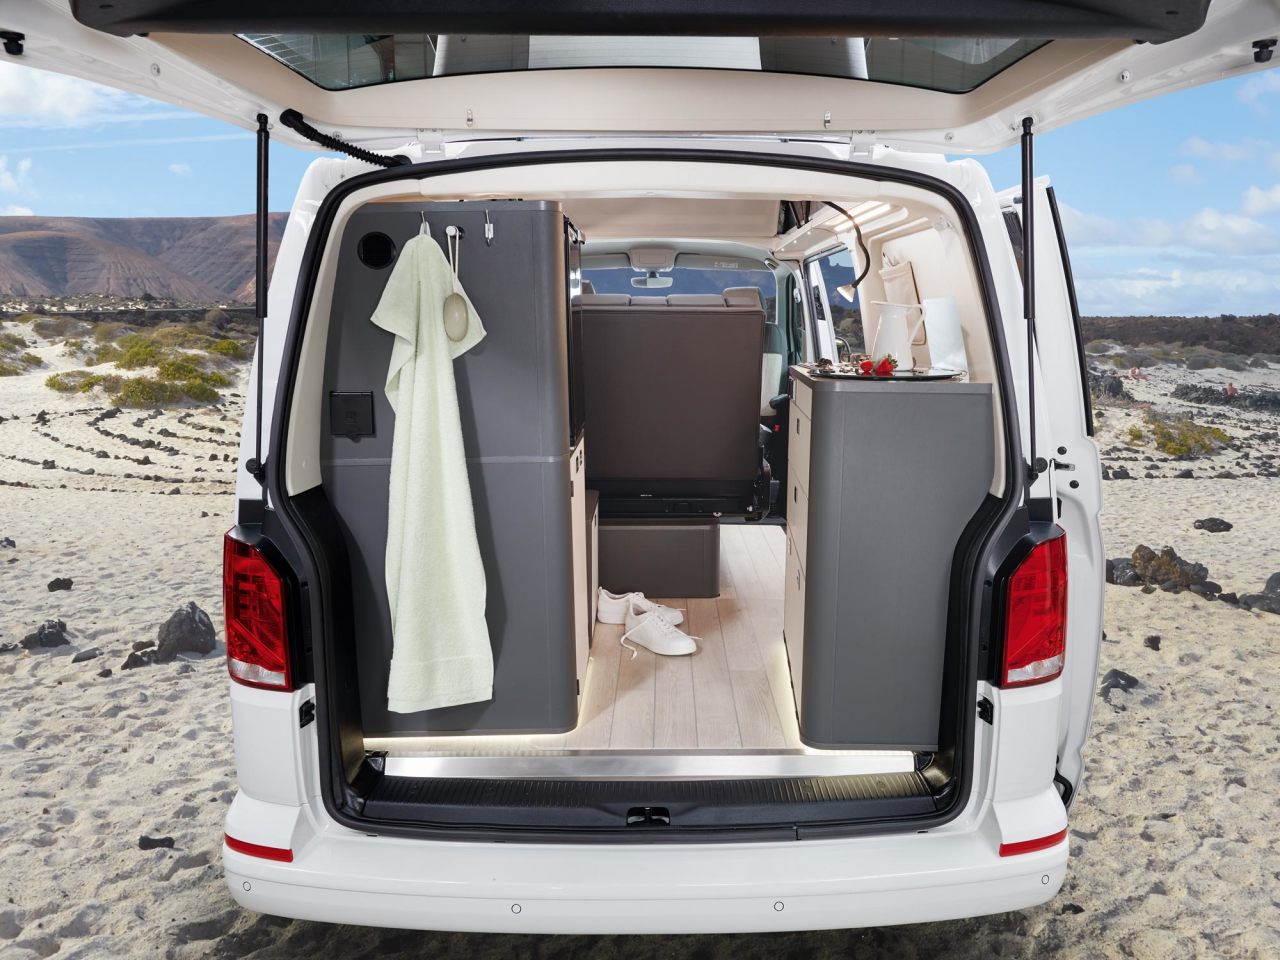 The Westfalia Kepler Five has an outdoor shower with convenient towel hanging and optional hot water